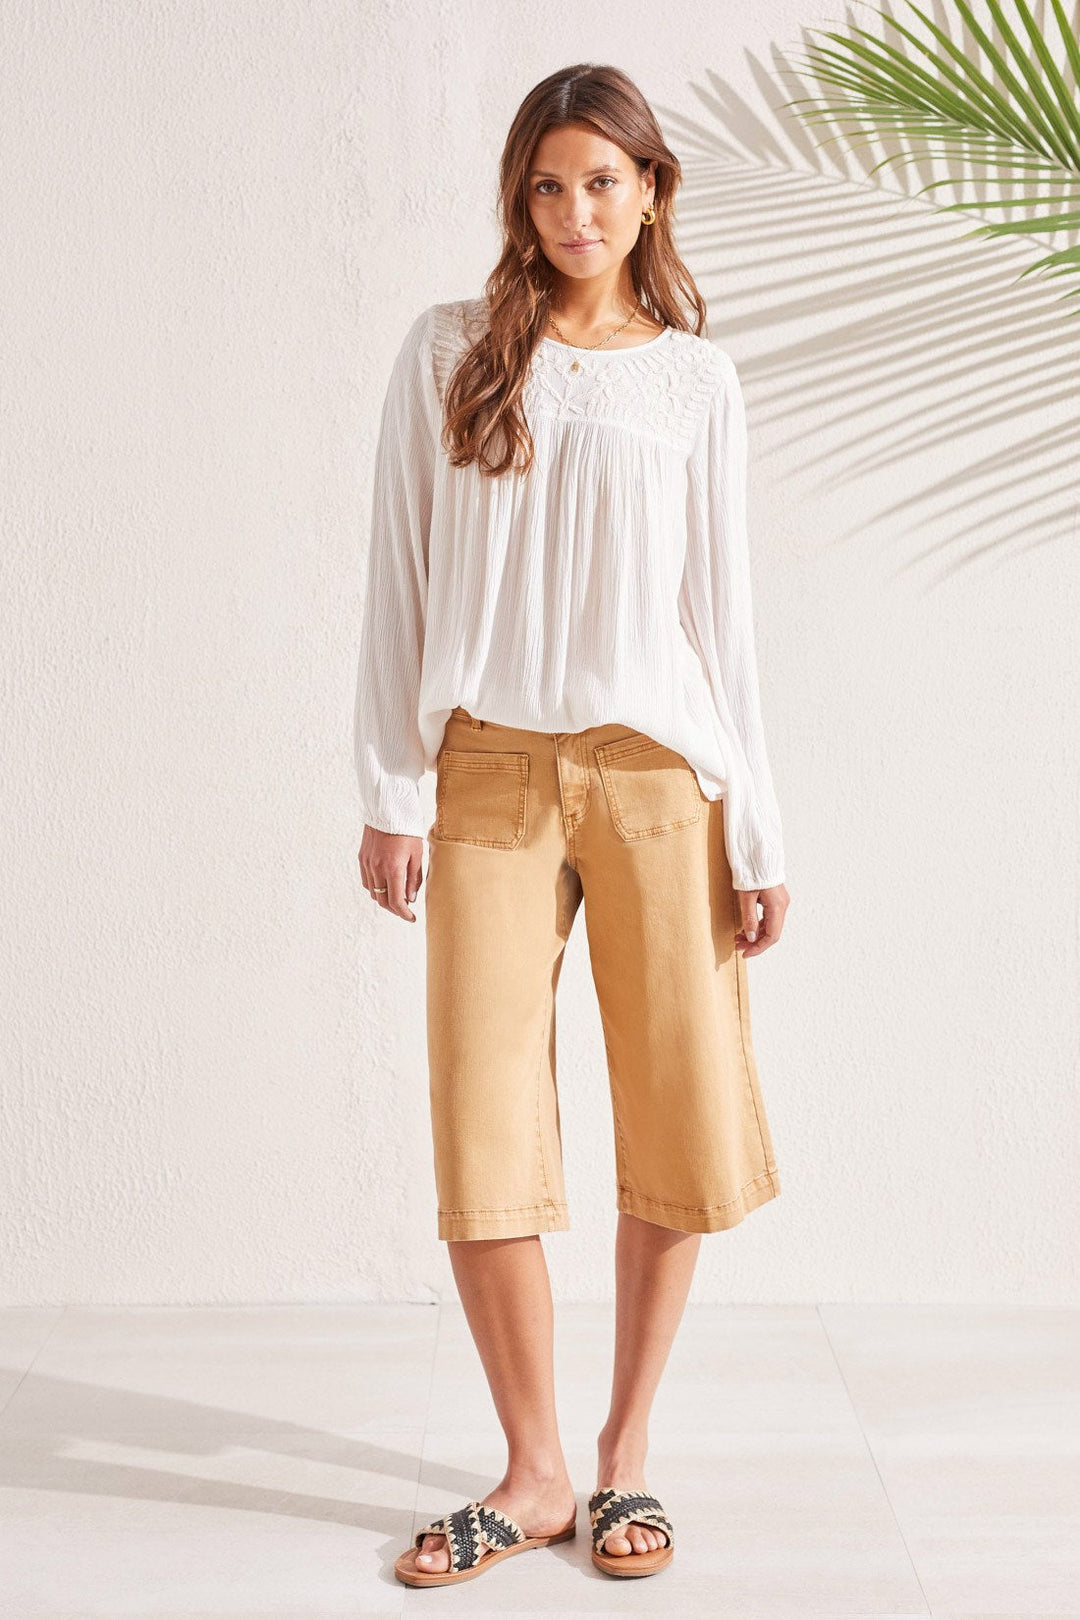 LONG SLEEVE BLOUSE W/EMBROIDERED YOKE - SAND DUST